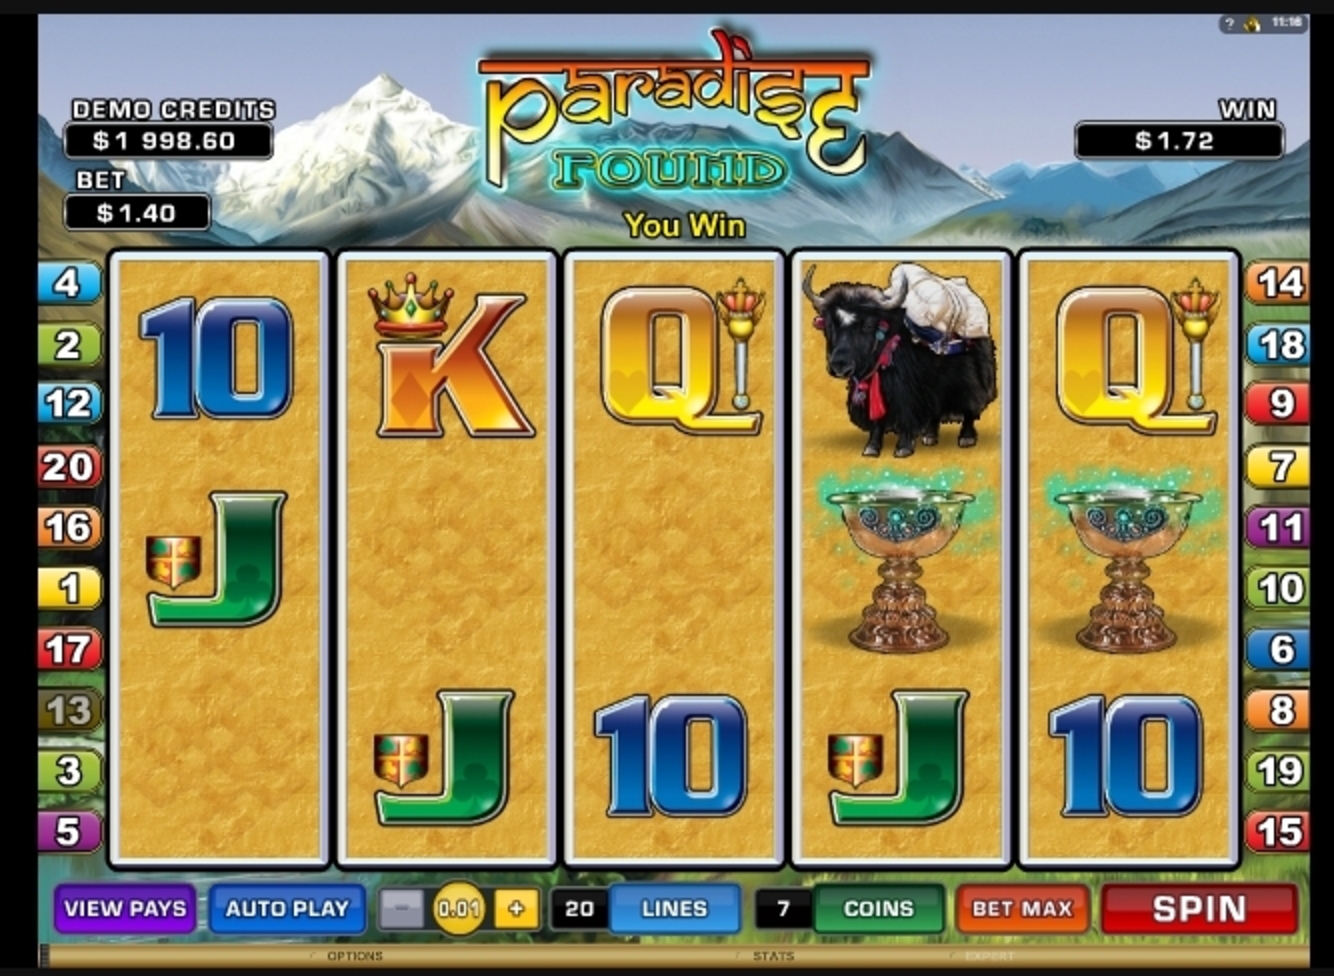 Win Money in Paradise Found Free Slot Game by Microgaming